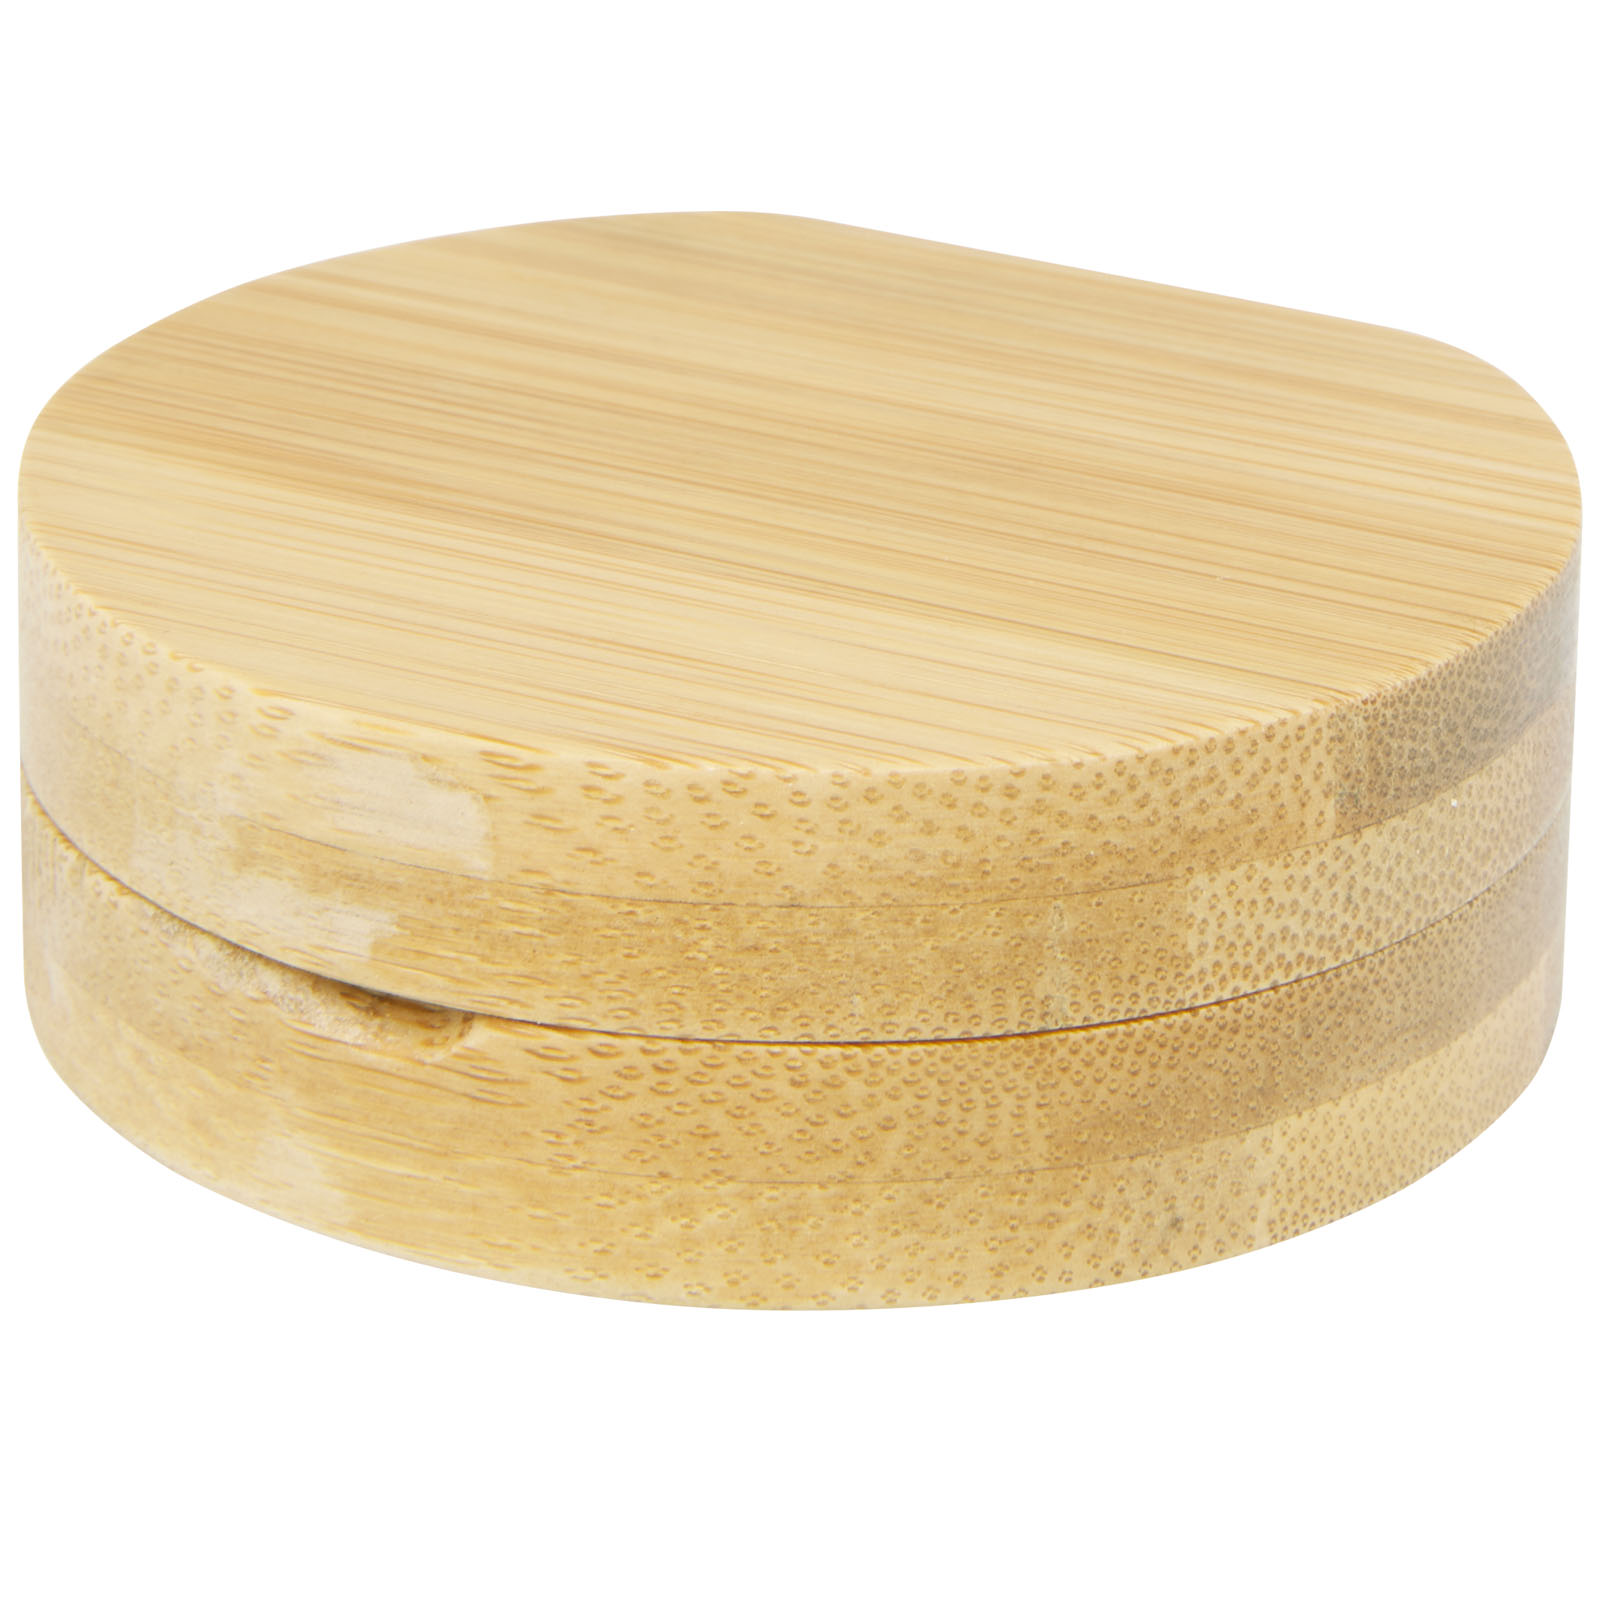 Advertising Personal Care - Afrodit bamboo pocket mirror - 2